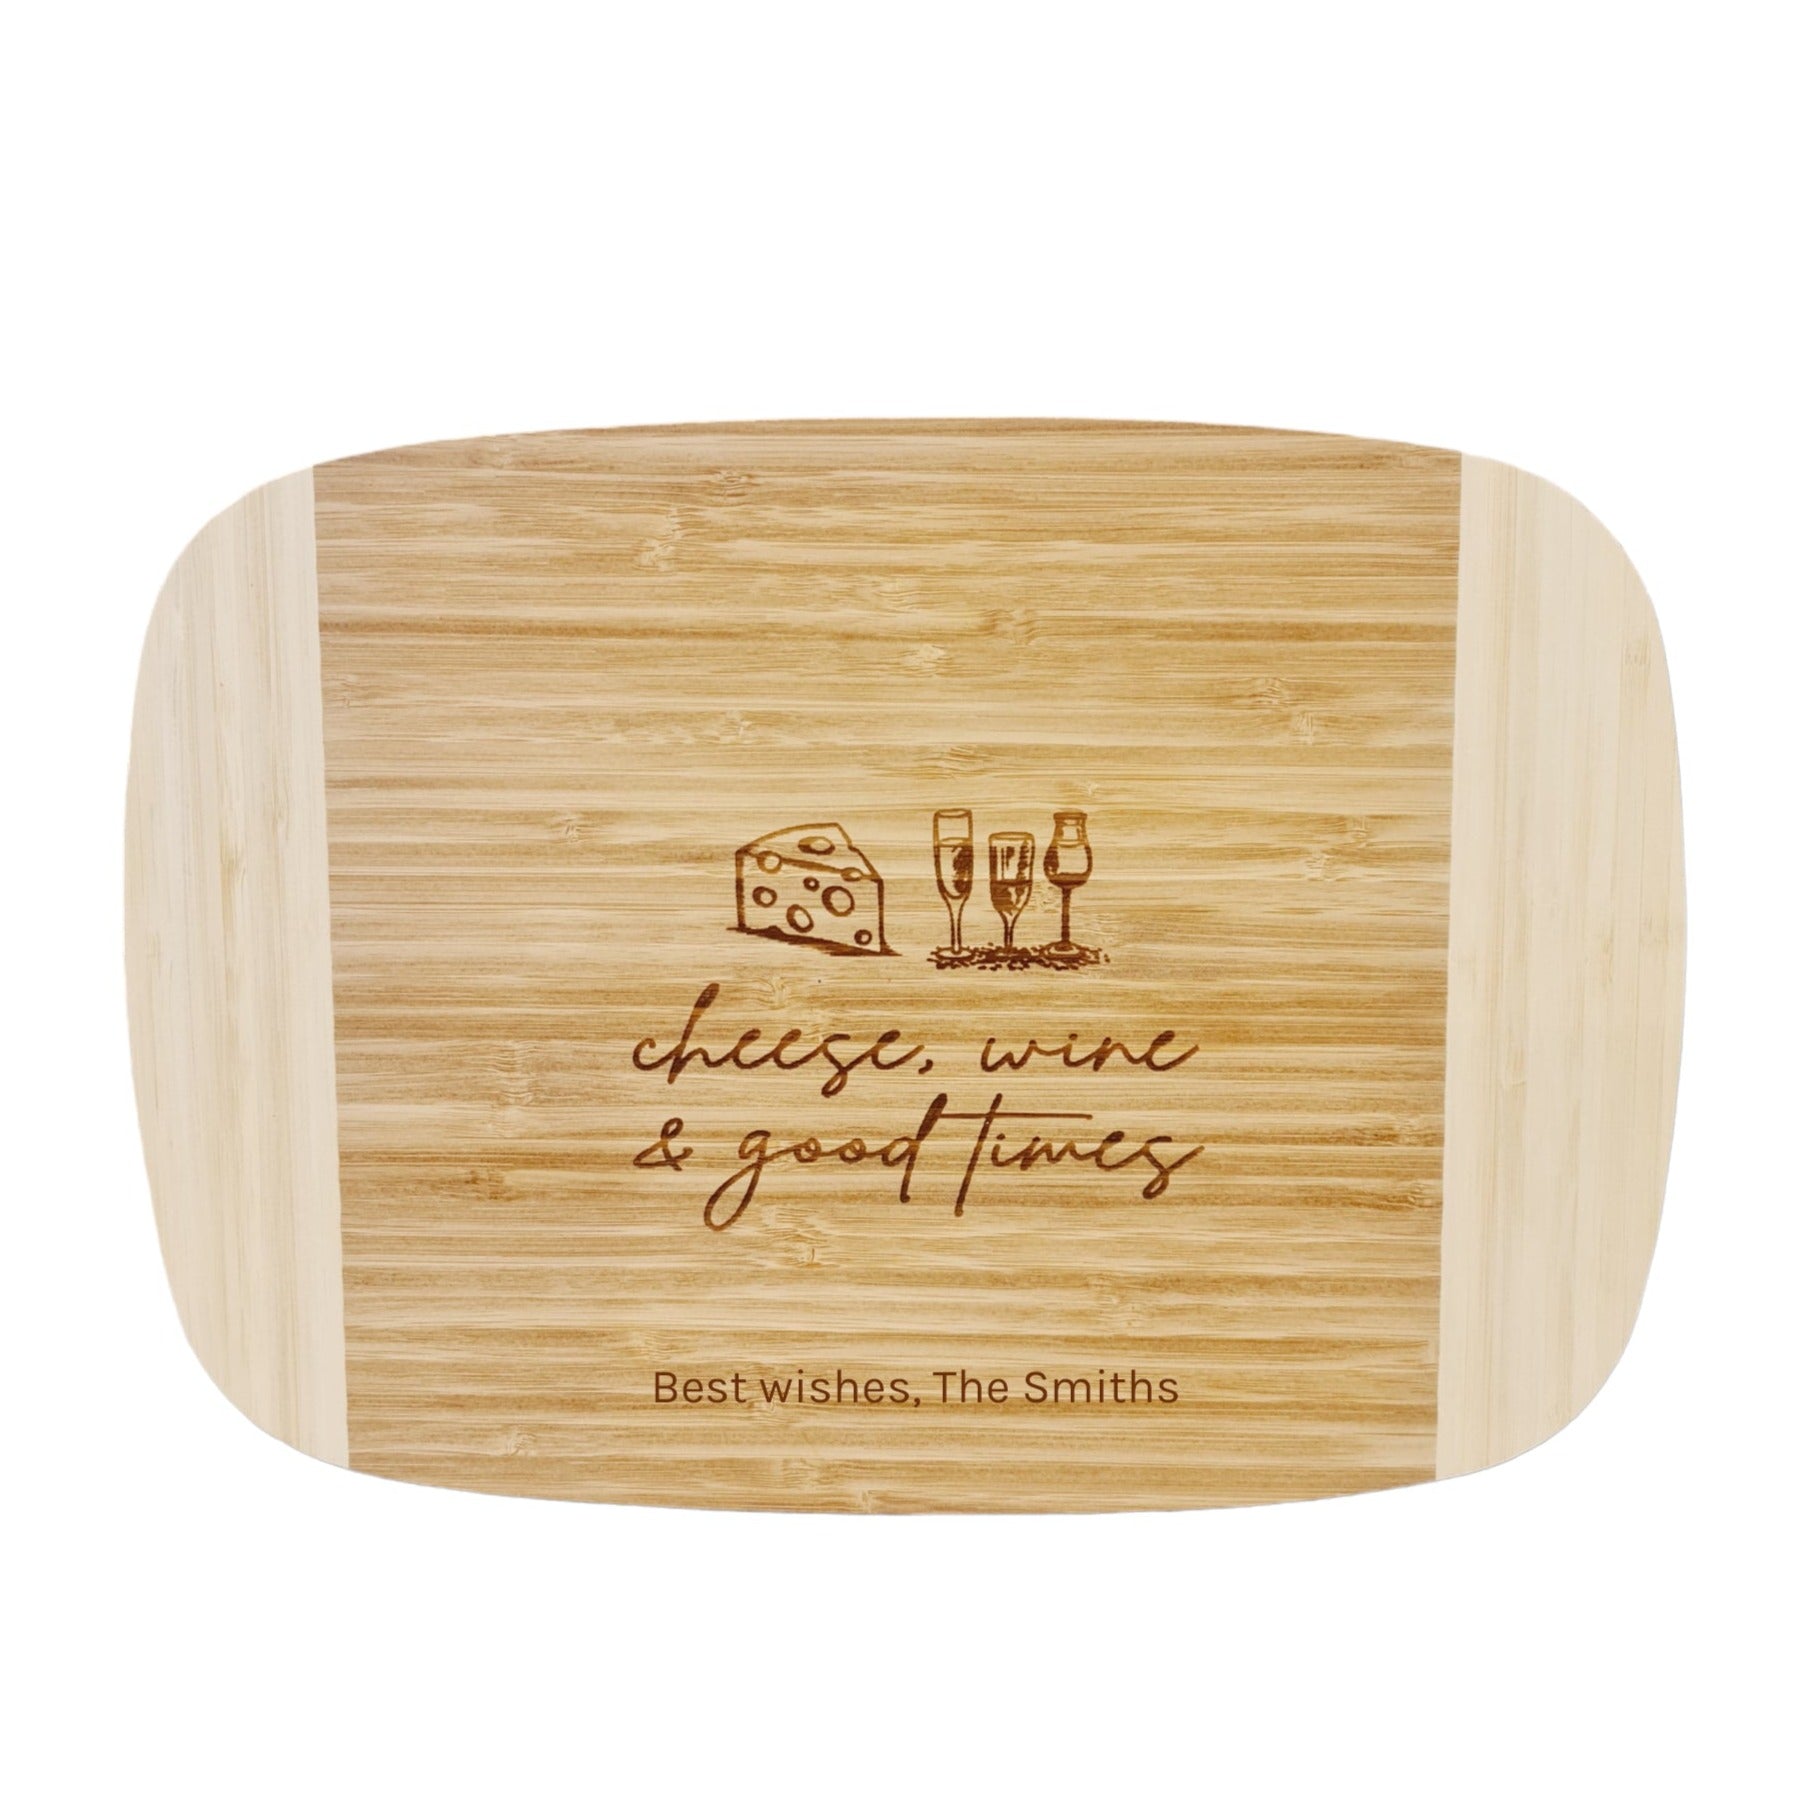 Bamboo Cutting board with personalisation at the bottom